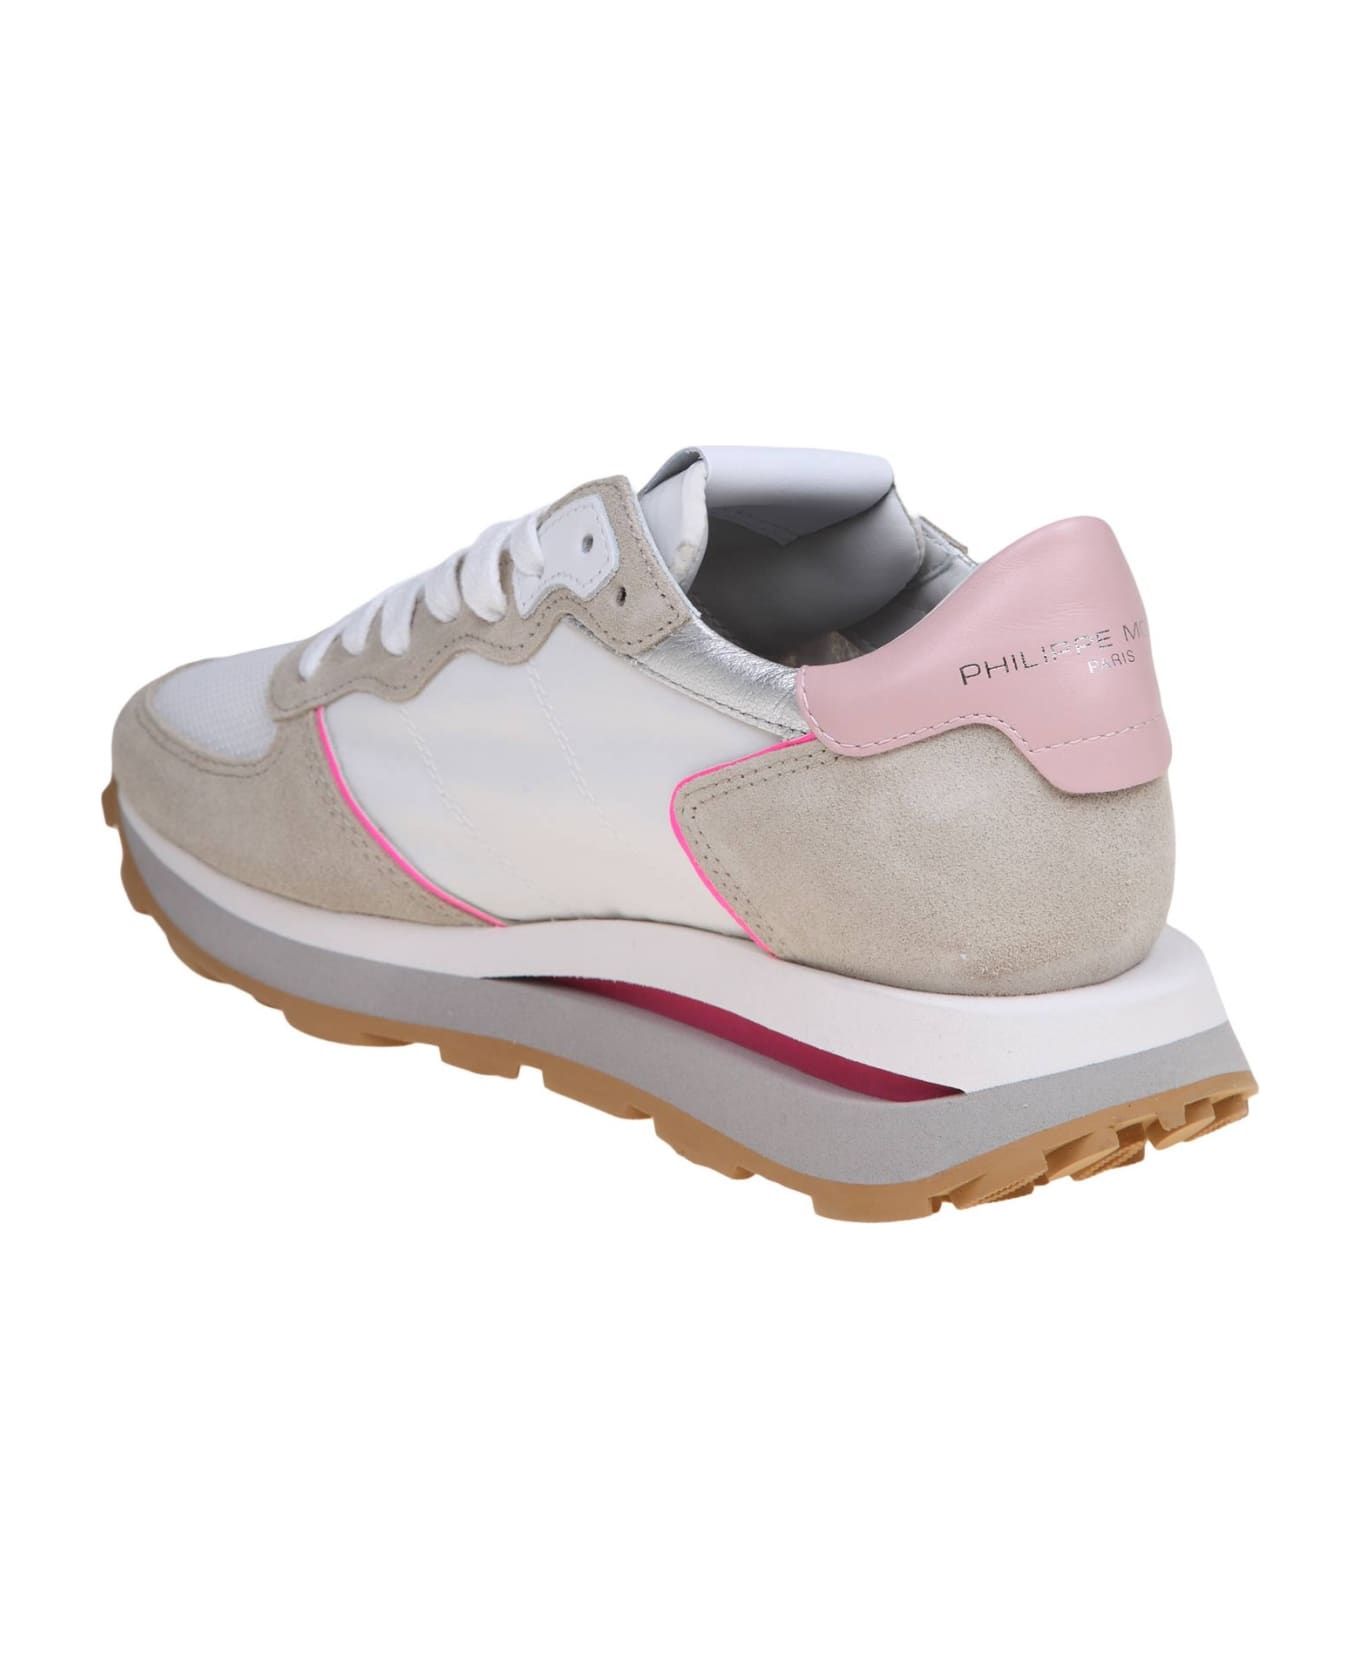 Philipp Plein Philippe Model Tropez Sneakers In Suede And Nylon Color White And Pink - White/Rose スニーカー